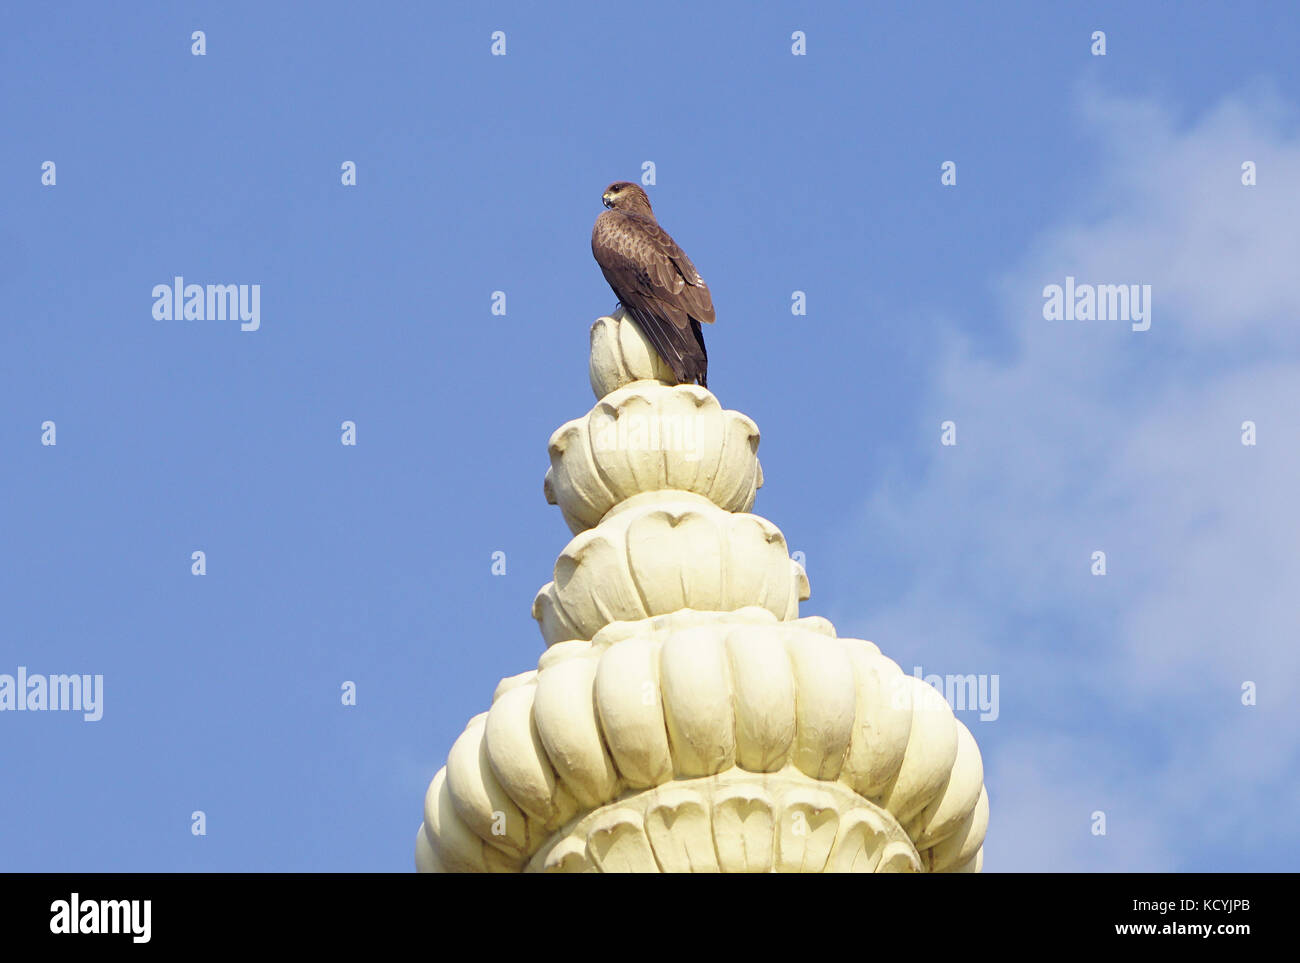 A kite sitting on the top of dome of a temple Stock Photo